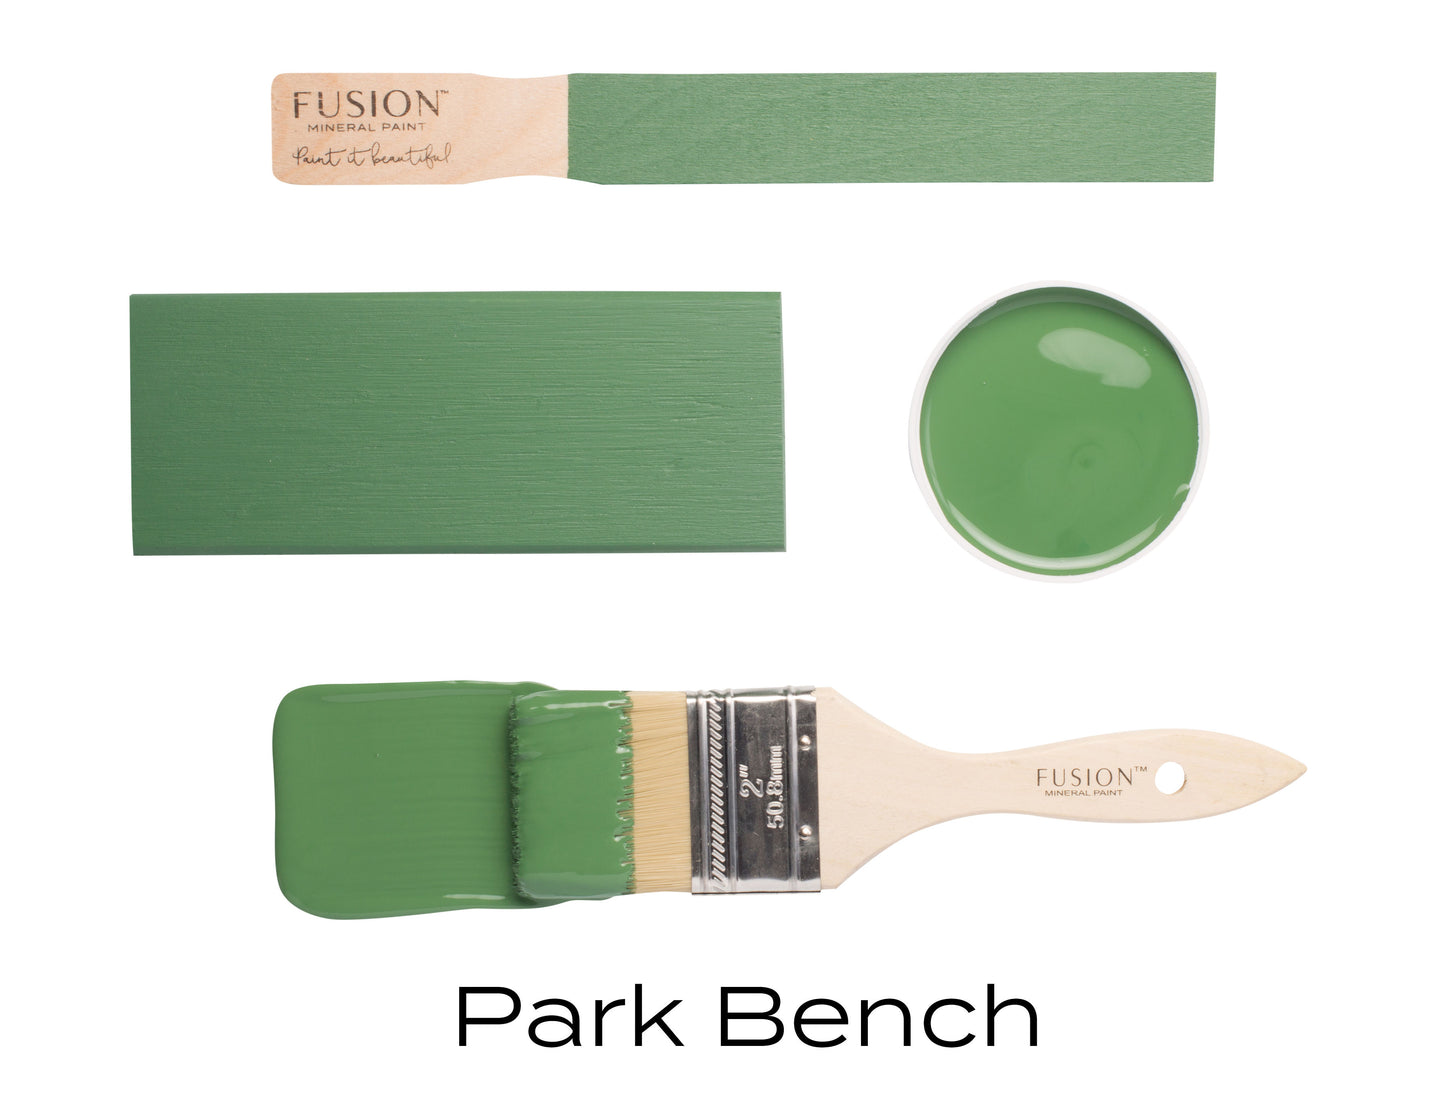 Park Bench by Fusion